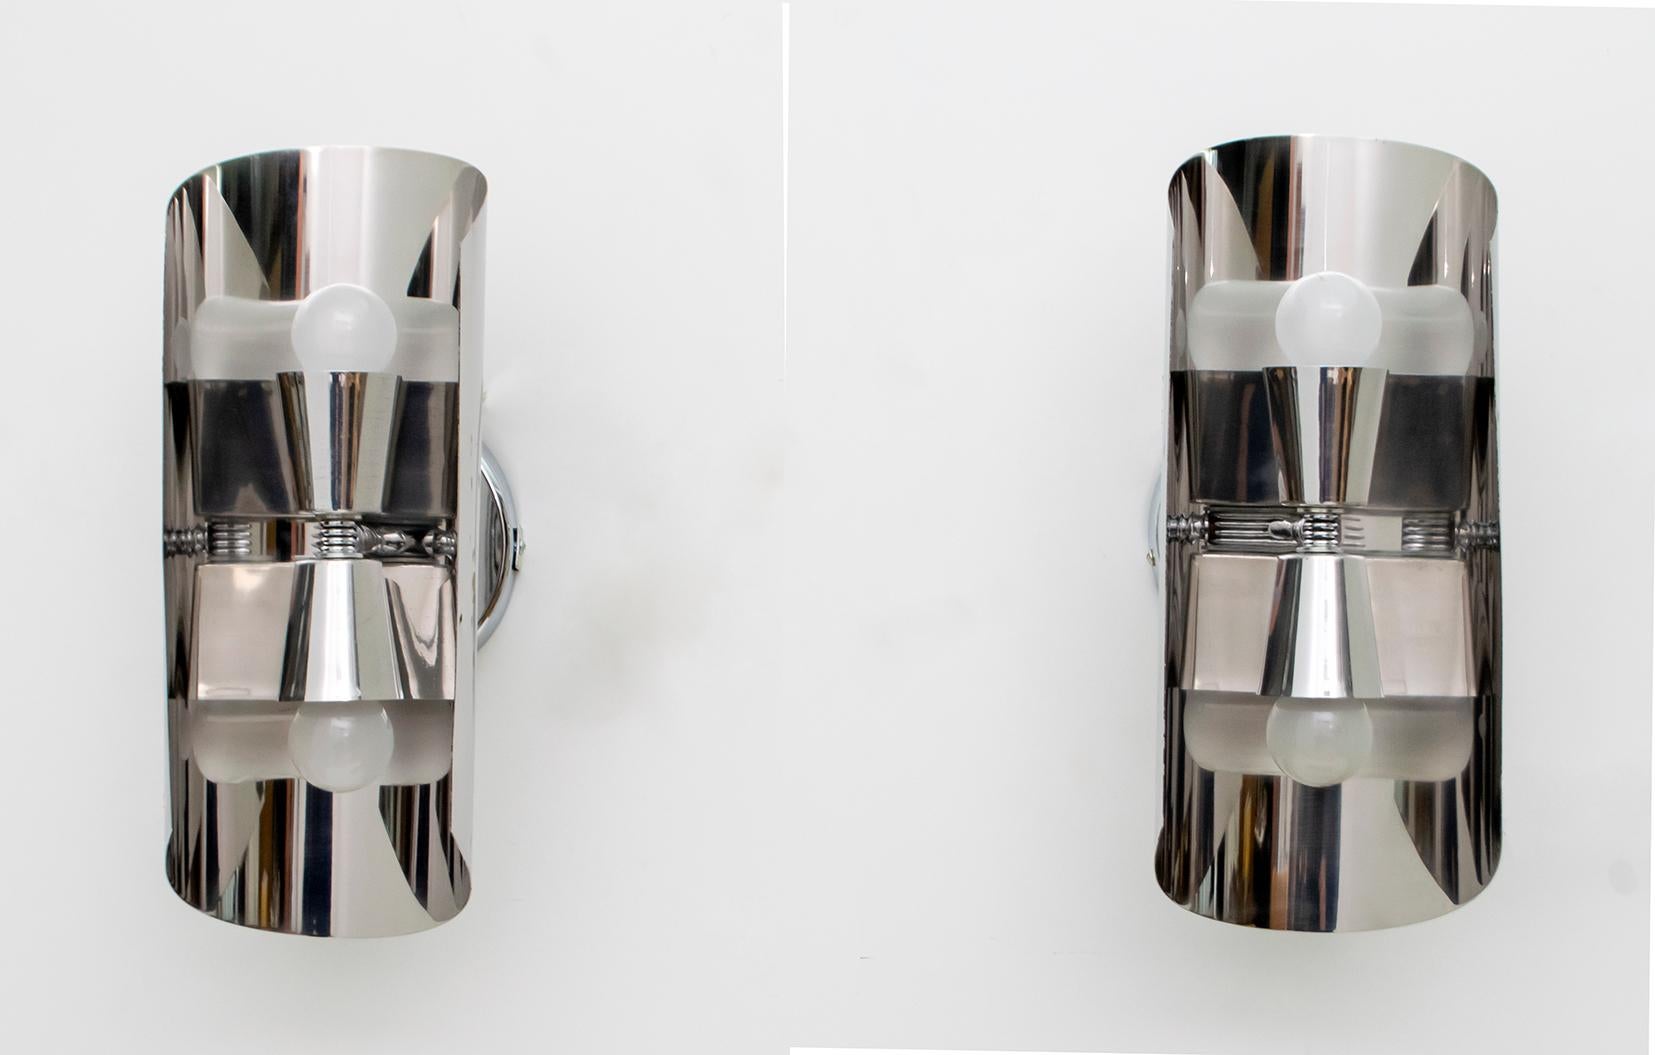 Pair of modern curved steel wall lights, designed in the style of Maria Pergay, France, 1970s. The sconces are created in a futuristic shape and have clean design features.